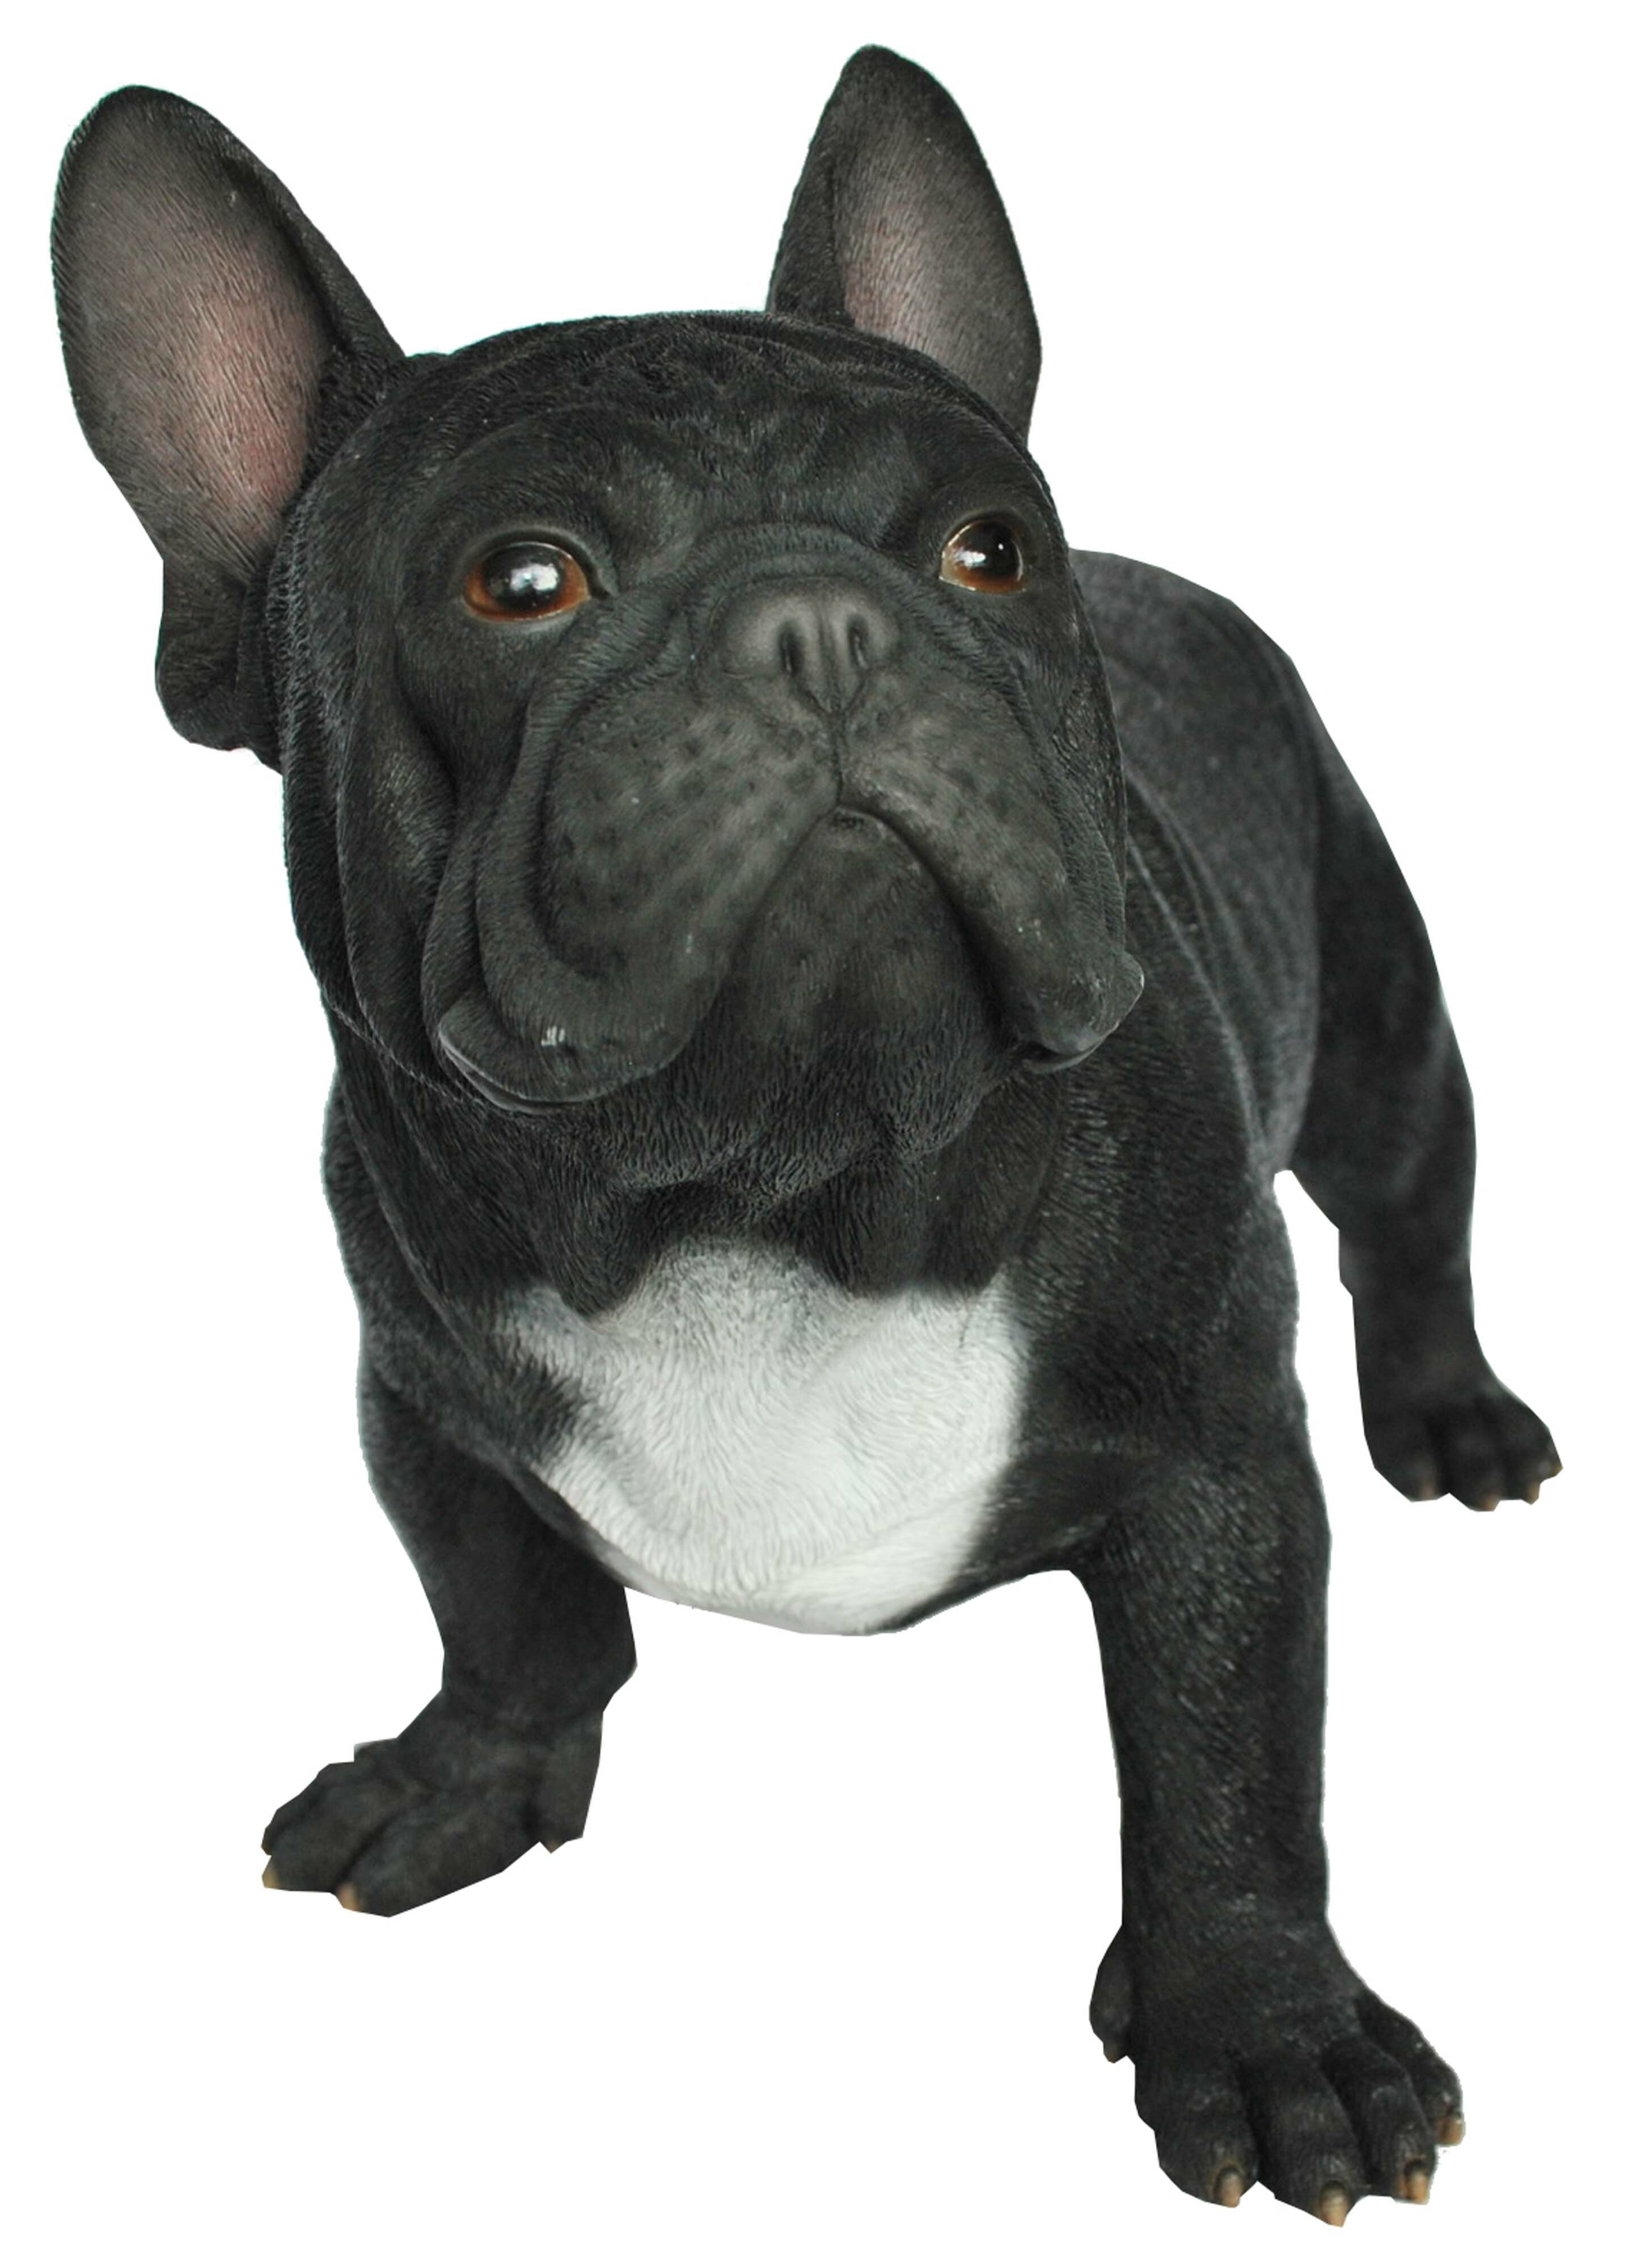 Details about   Angry French Bulldog Rude Dog Cute Art Designer Toy Figurine Display Figure Gift 